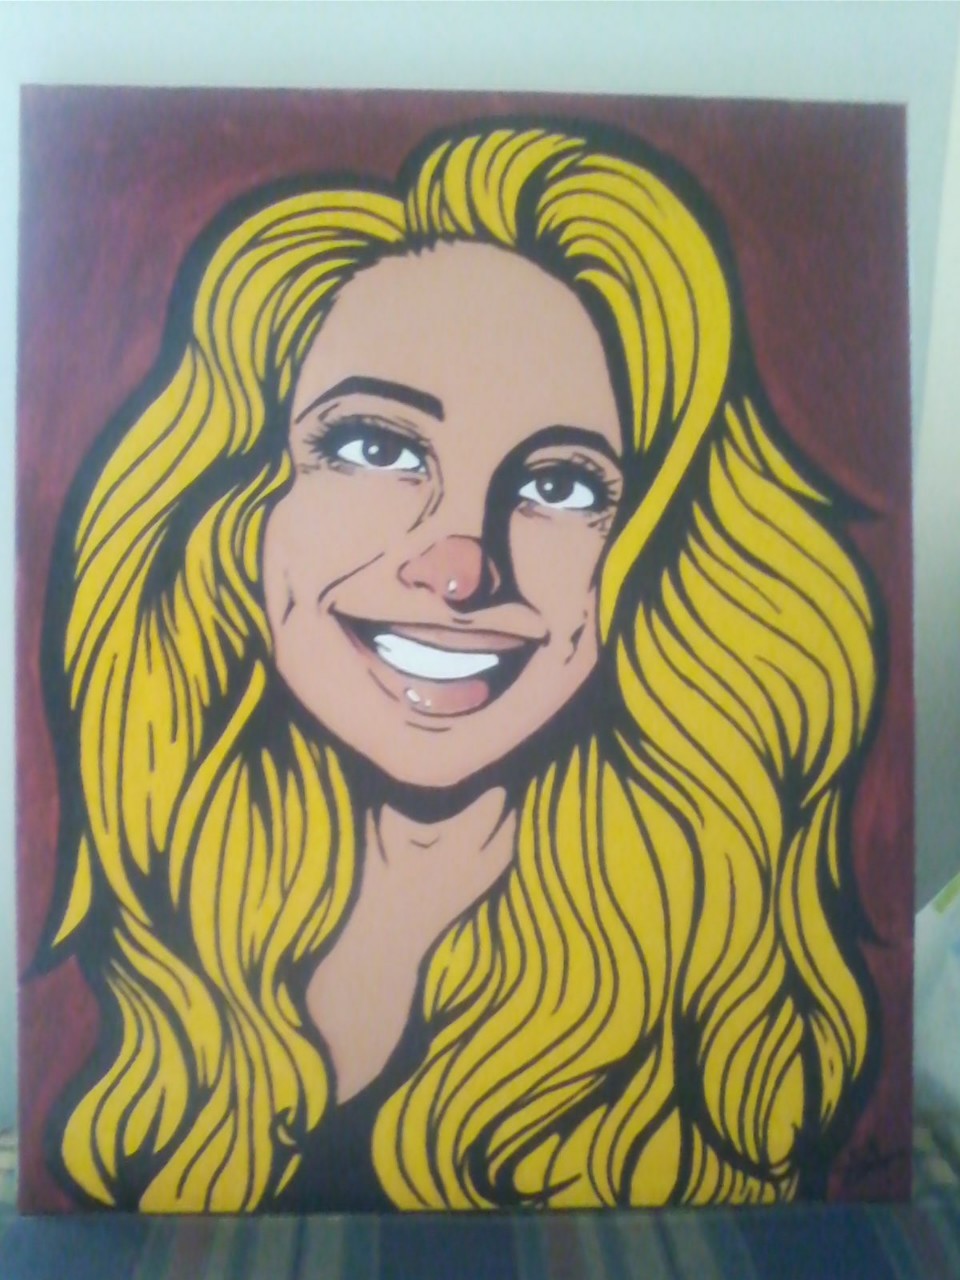 Maria - Birthday gift for muy cousin. Acrilyc &amp; black marker.